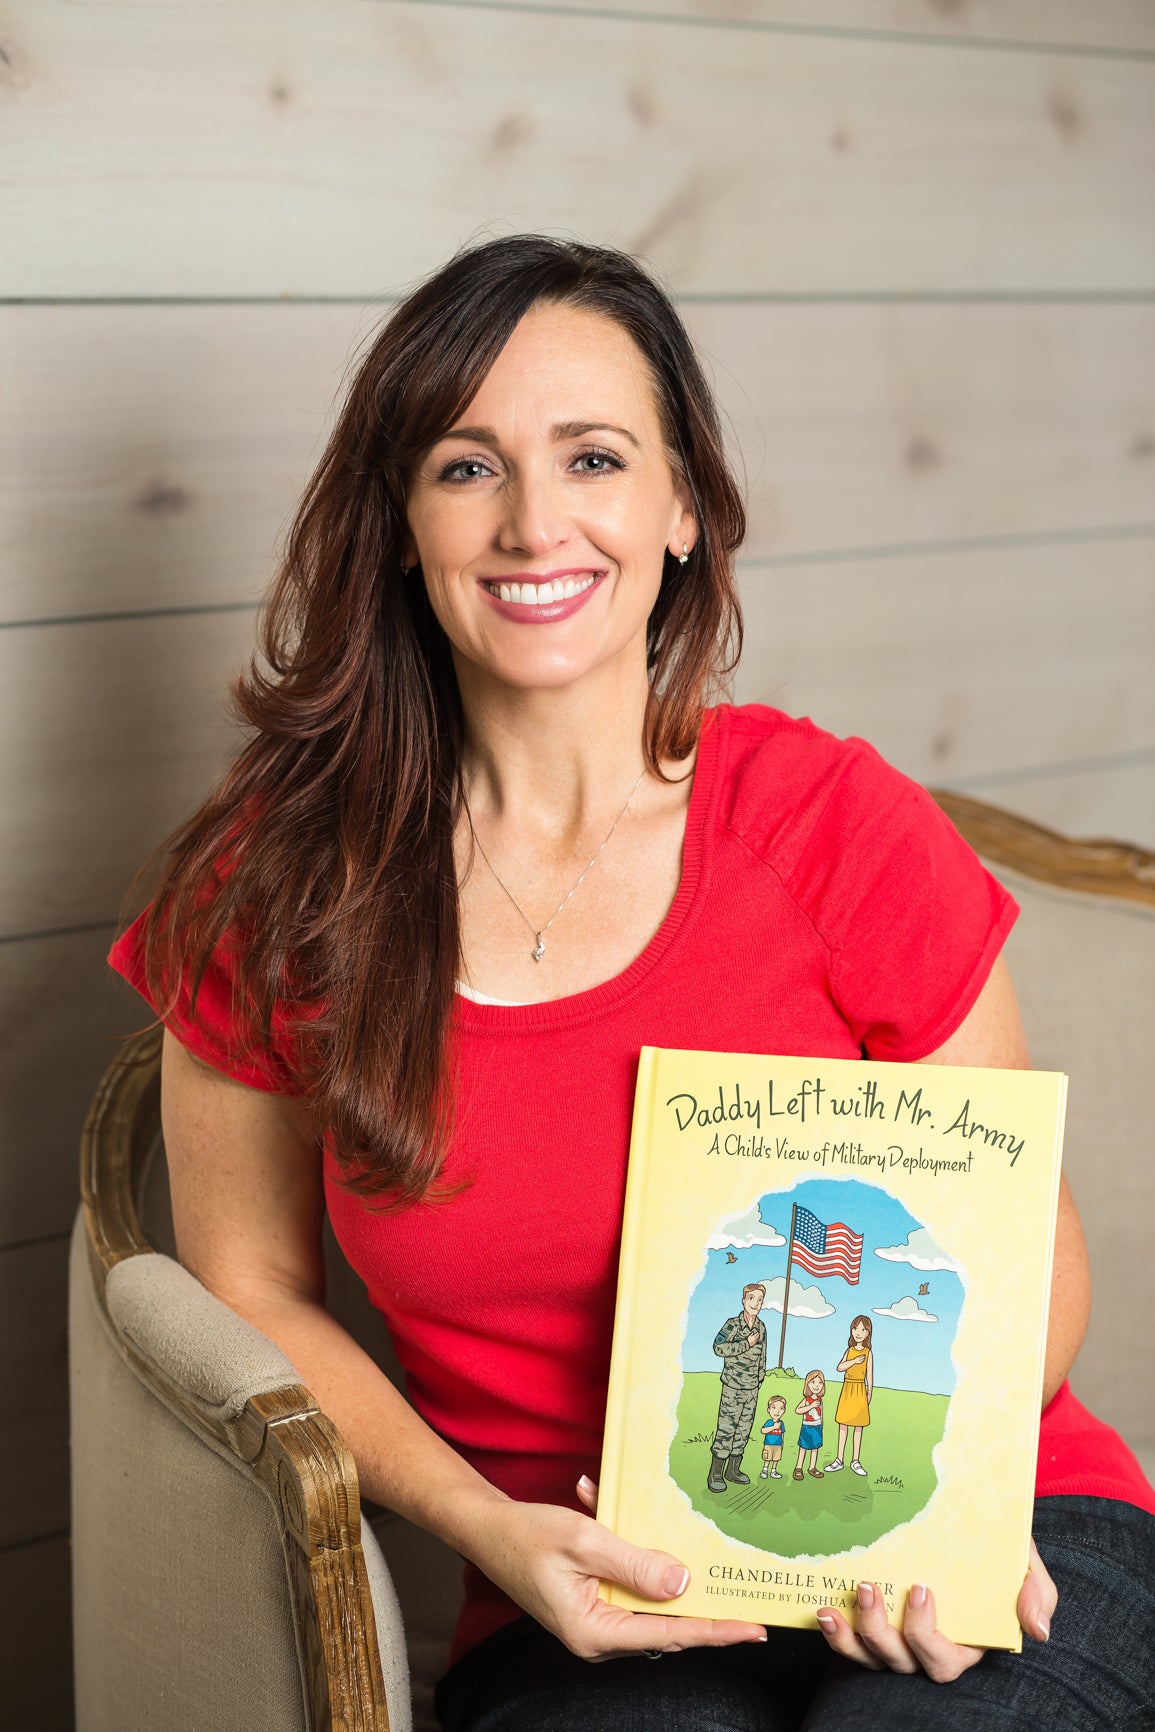 Military Spouse Chandelle Walker, Author of "Daddy Left With Mr. Army."